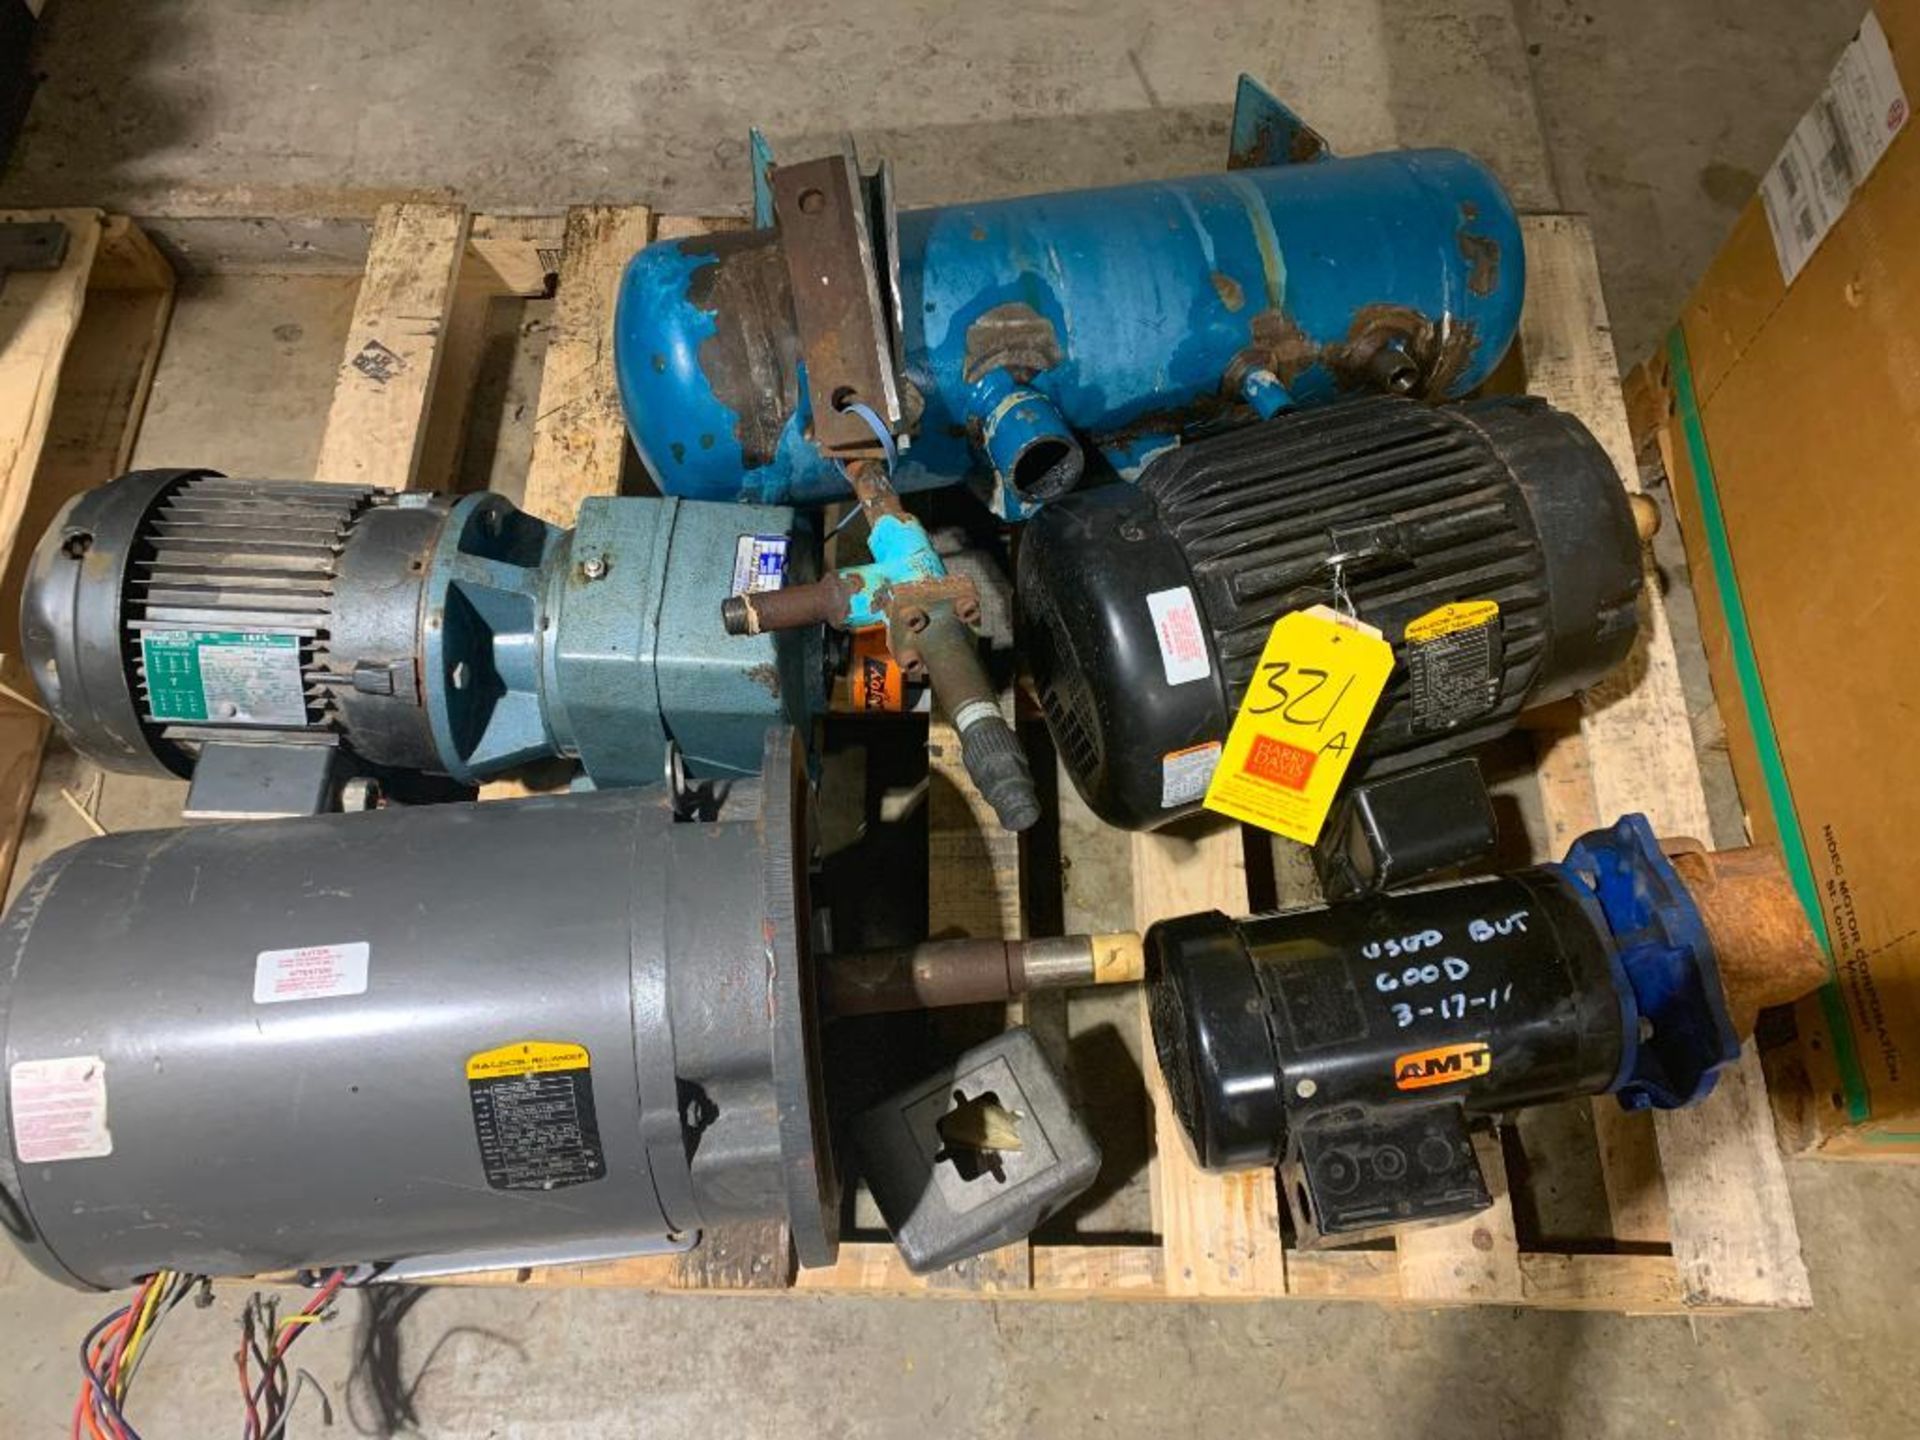 Assorted Motors, Including: Baldor 20/15 HP, Lincoln 3 HP with Gear Reducing Drive, AMT 3 HP, 7.5 HP